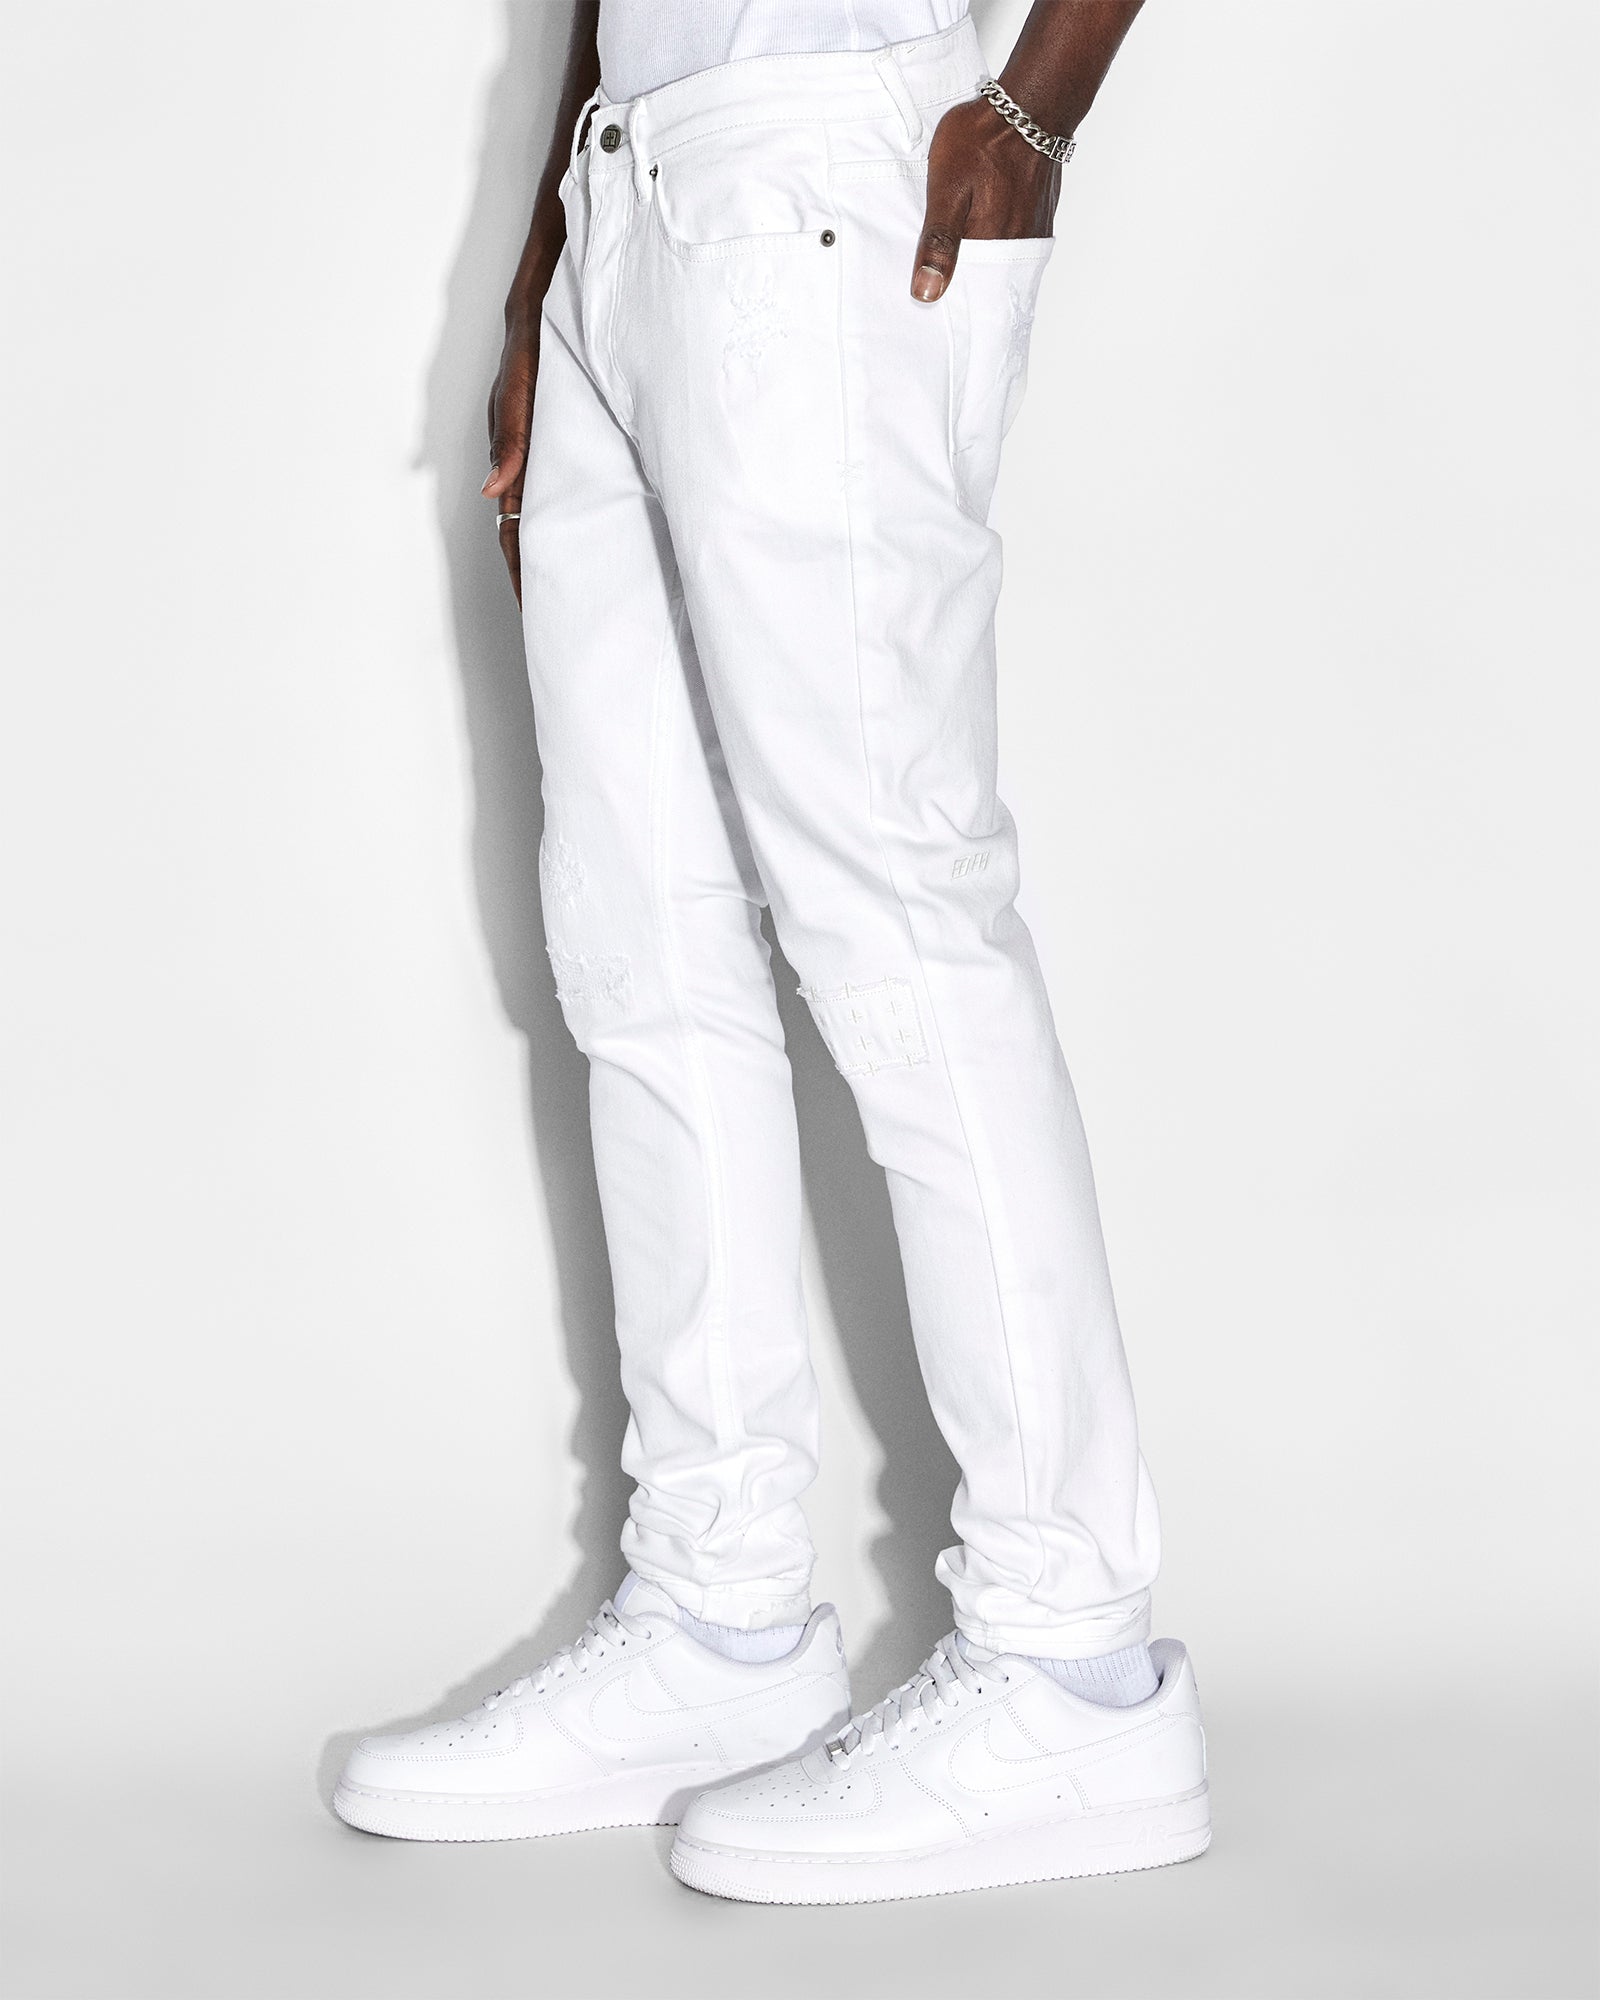 White Skinny Jeans Outfits For Men (222 ideas & outfits) | Lookastic